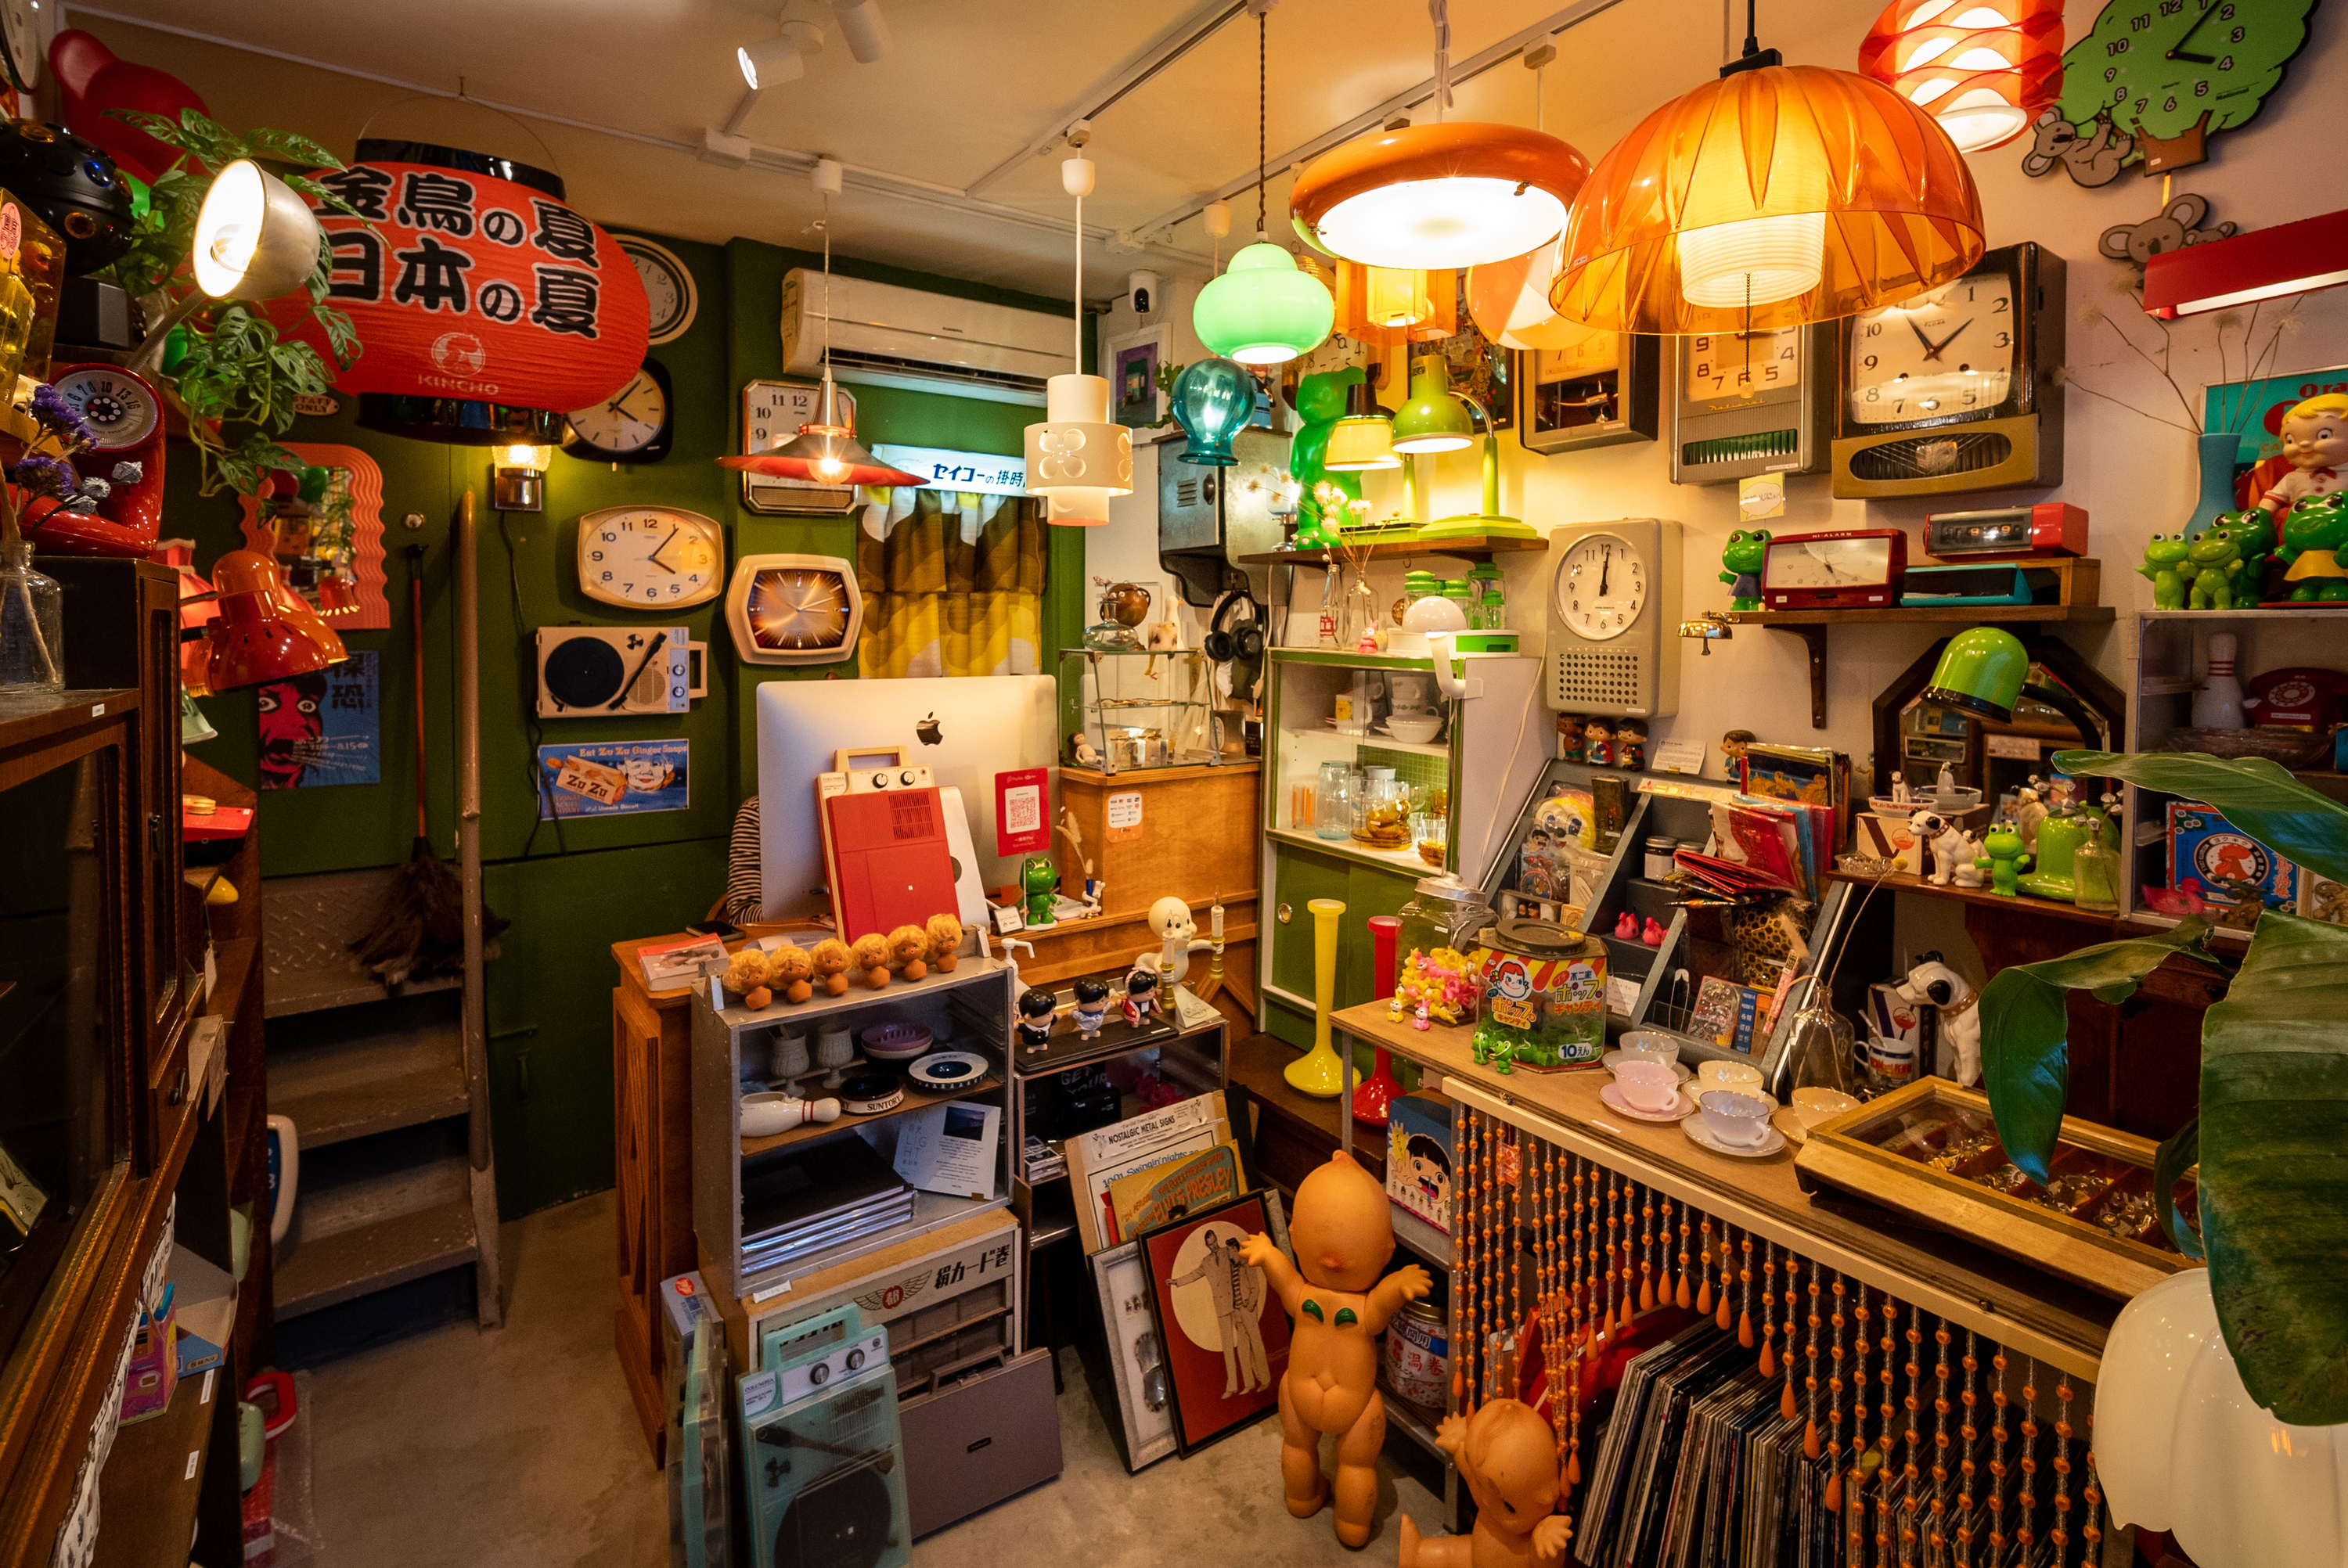 18 Best Shopping Experiences in Kowloon - Where to Shop and What